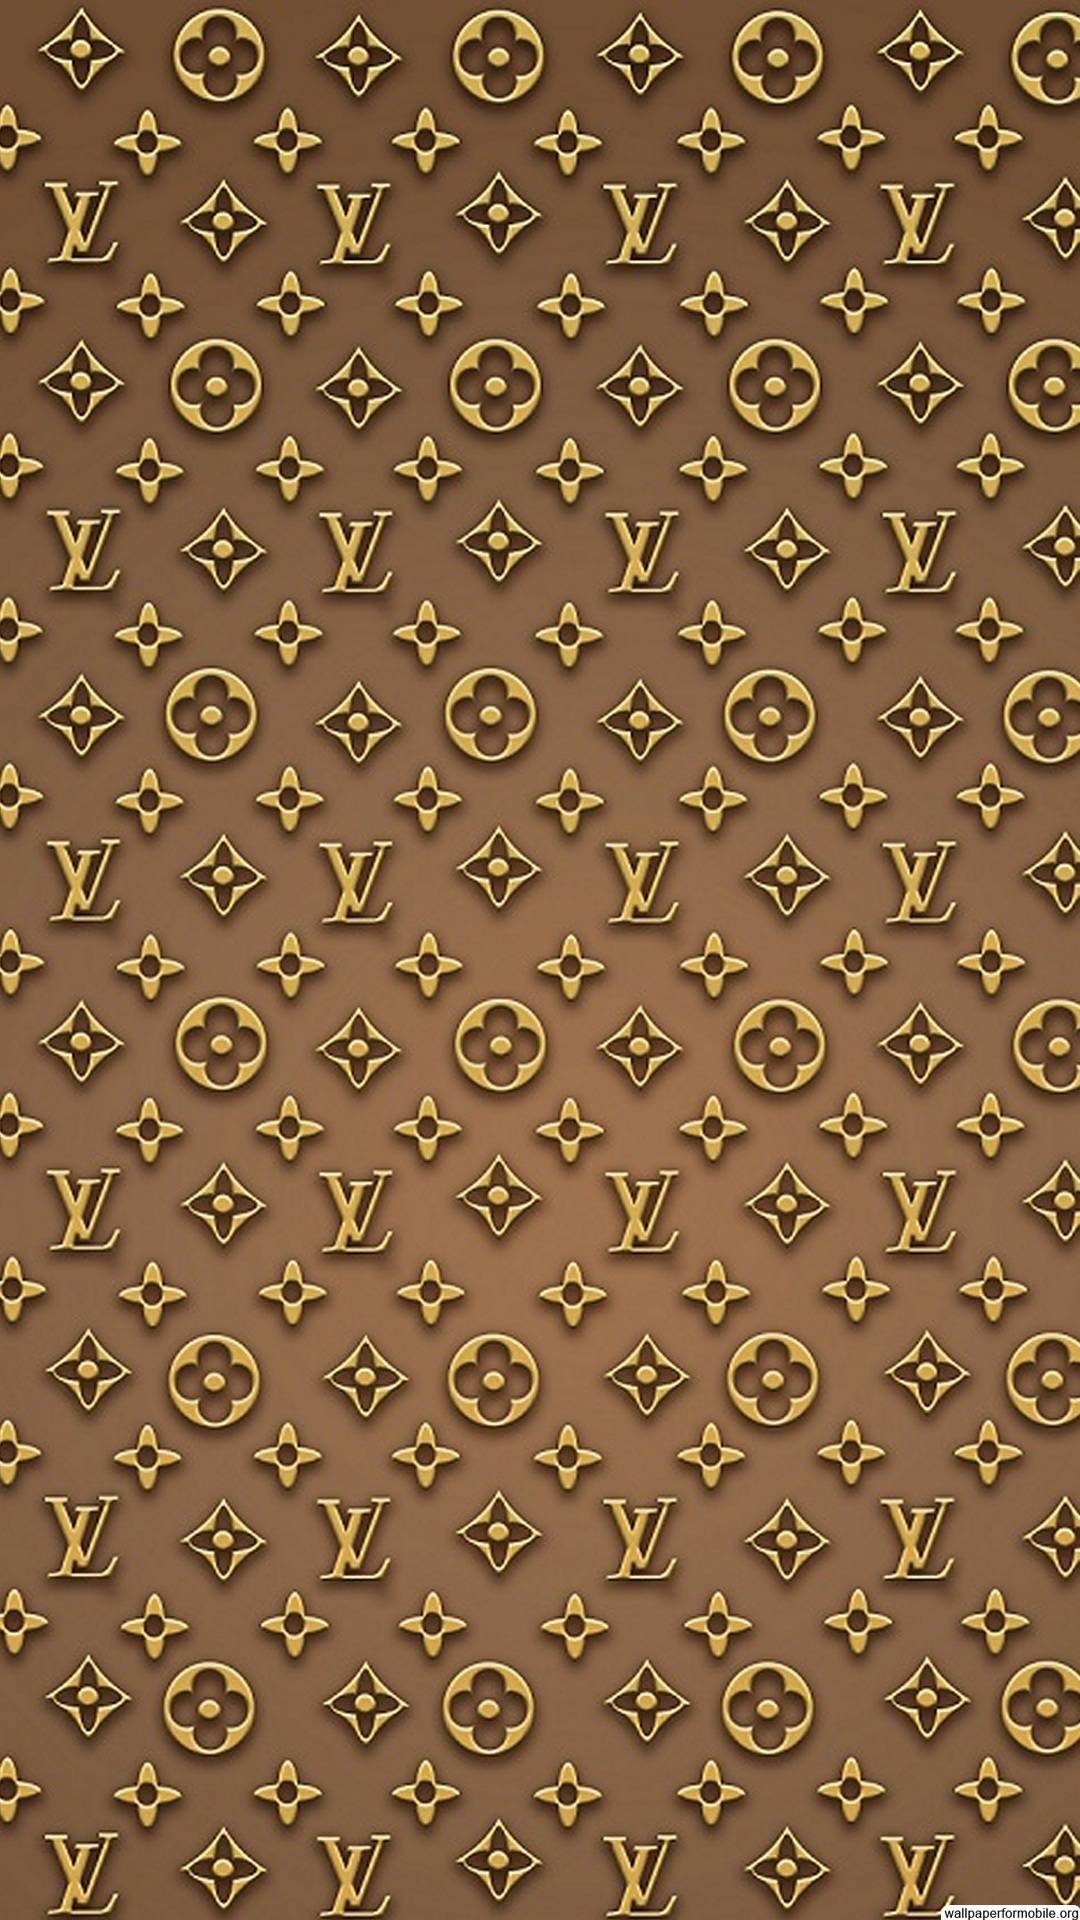 Louis Vuitton Android Wallpapers - Top Free Louis Vuitton Android